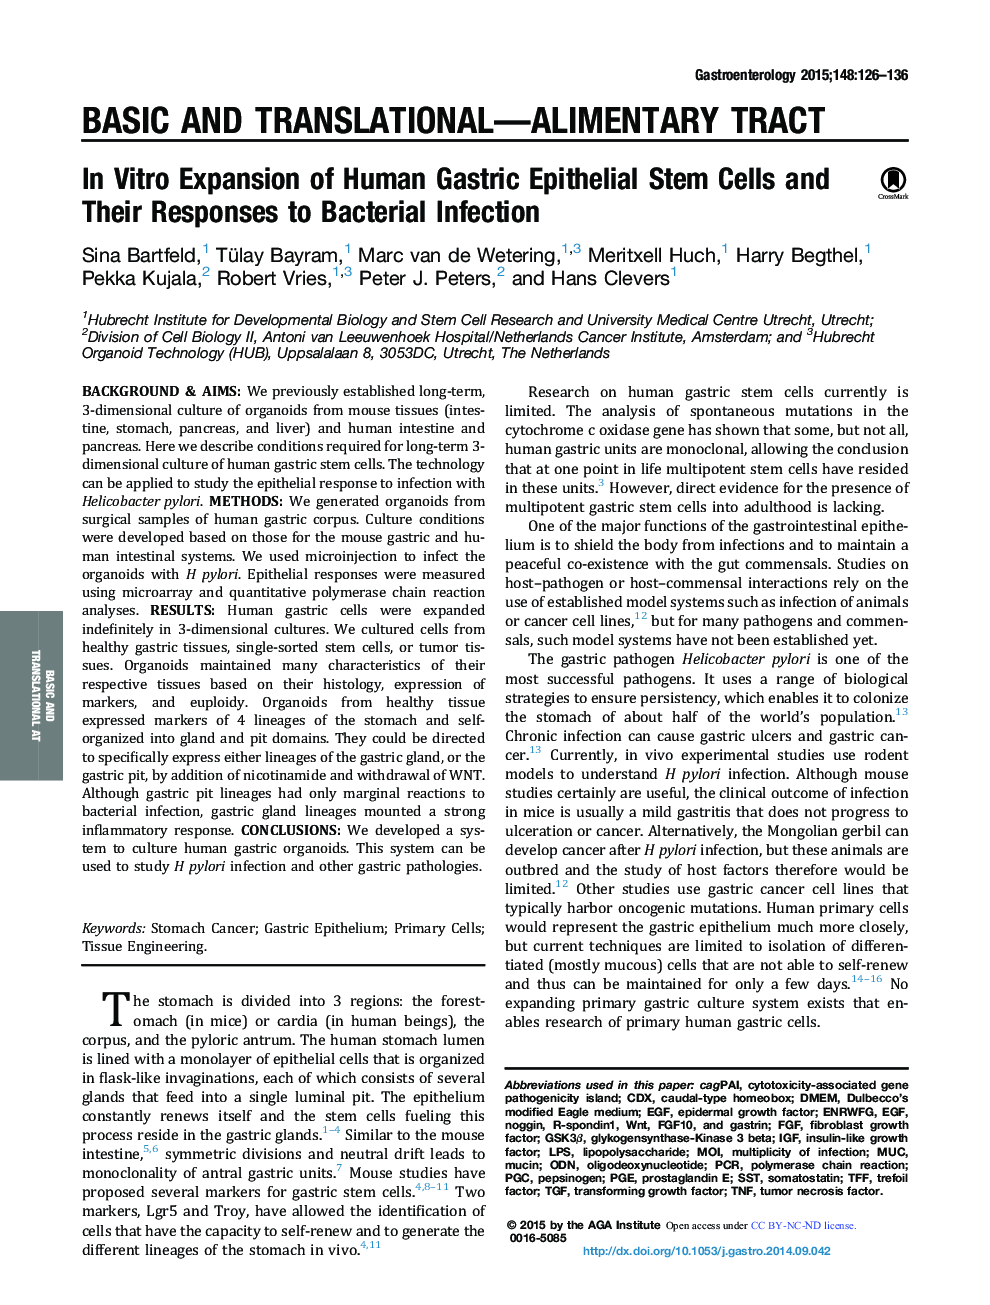 Original ResearchFull Report: Basic and Translational-Alimentary TractInÂ Vitro Expansion of Human Gastric Epithelial Stem Cells and Their Responses to Bacterial Infection